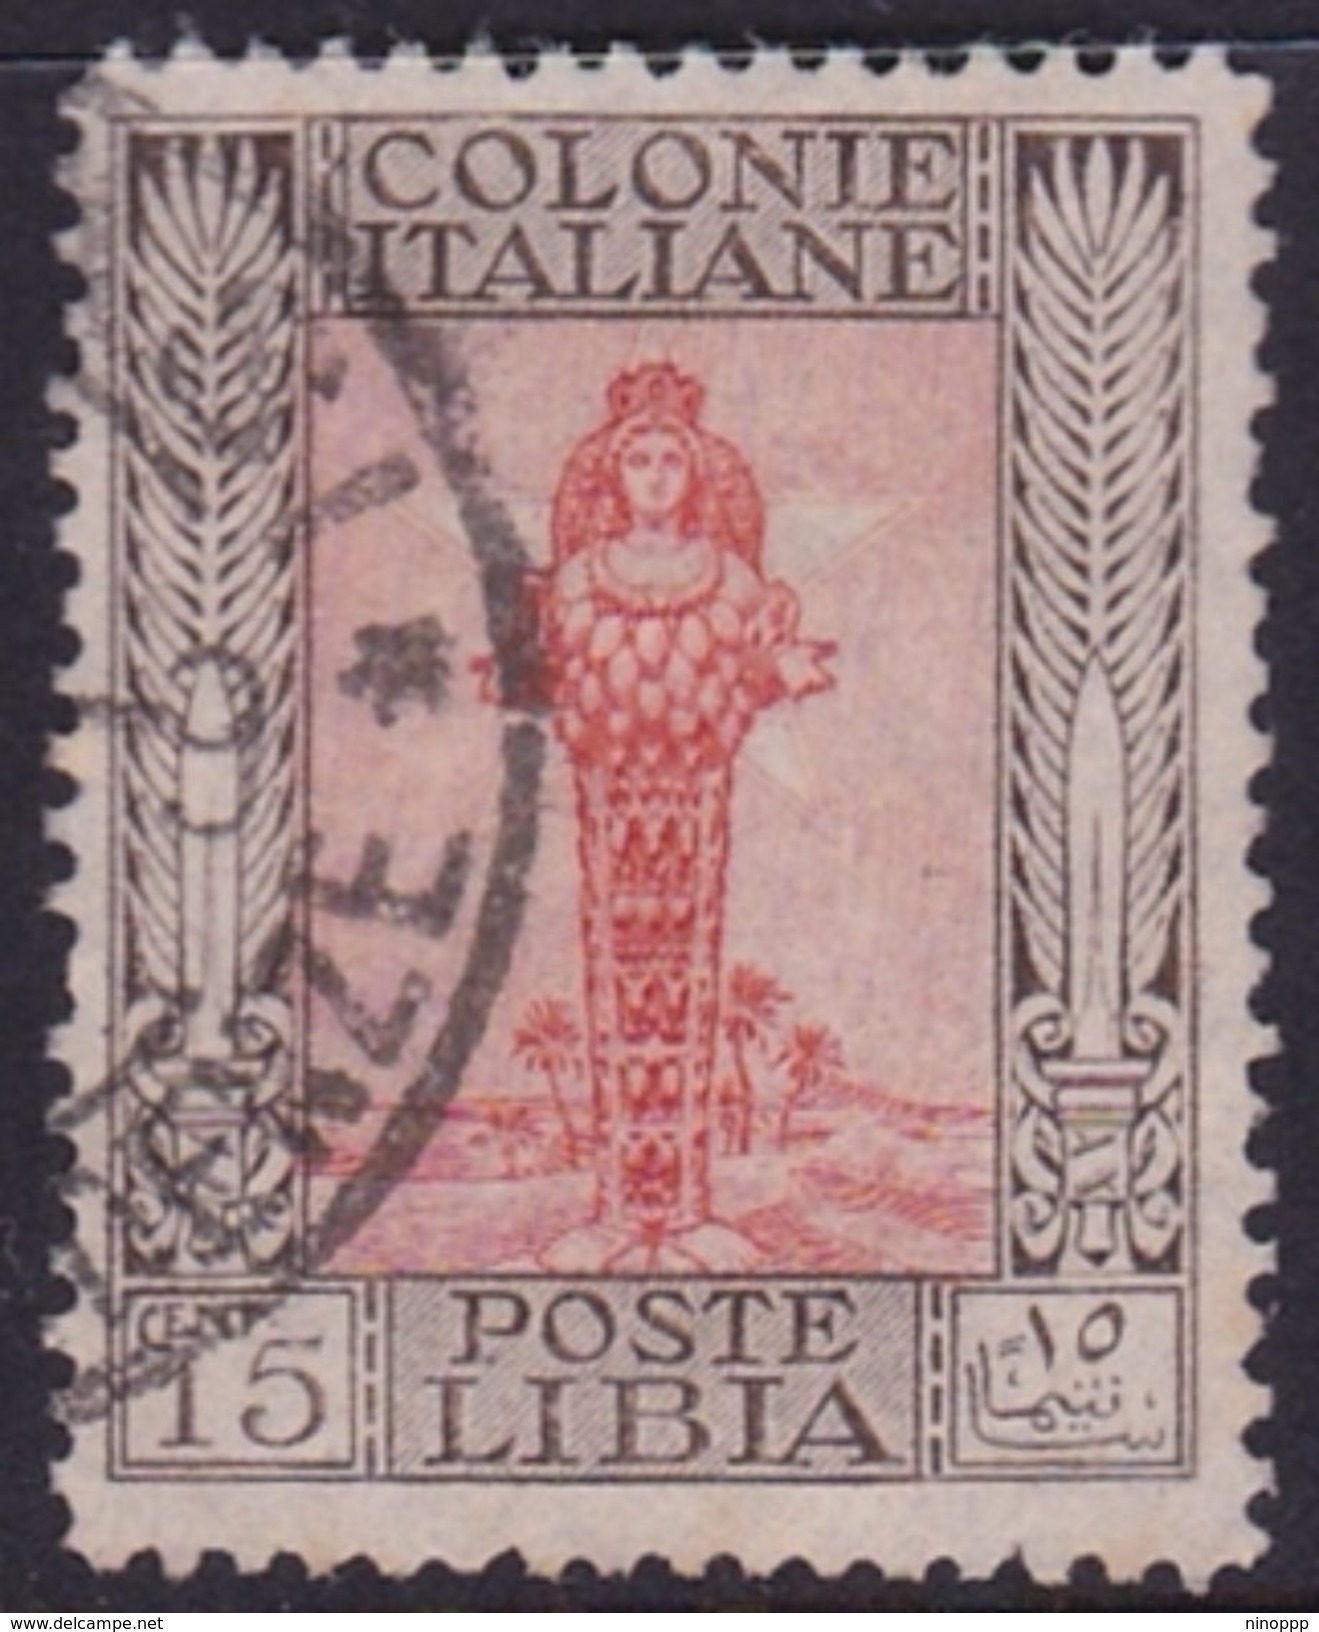 Italy-Colonies And Territories-Libya S 25 1921 ,Pictorials, 15c Diana Of Ephesus,used - Libia